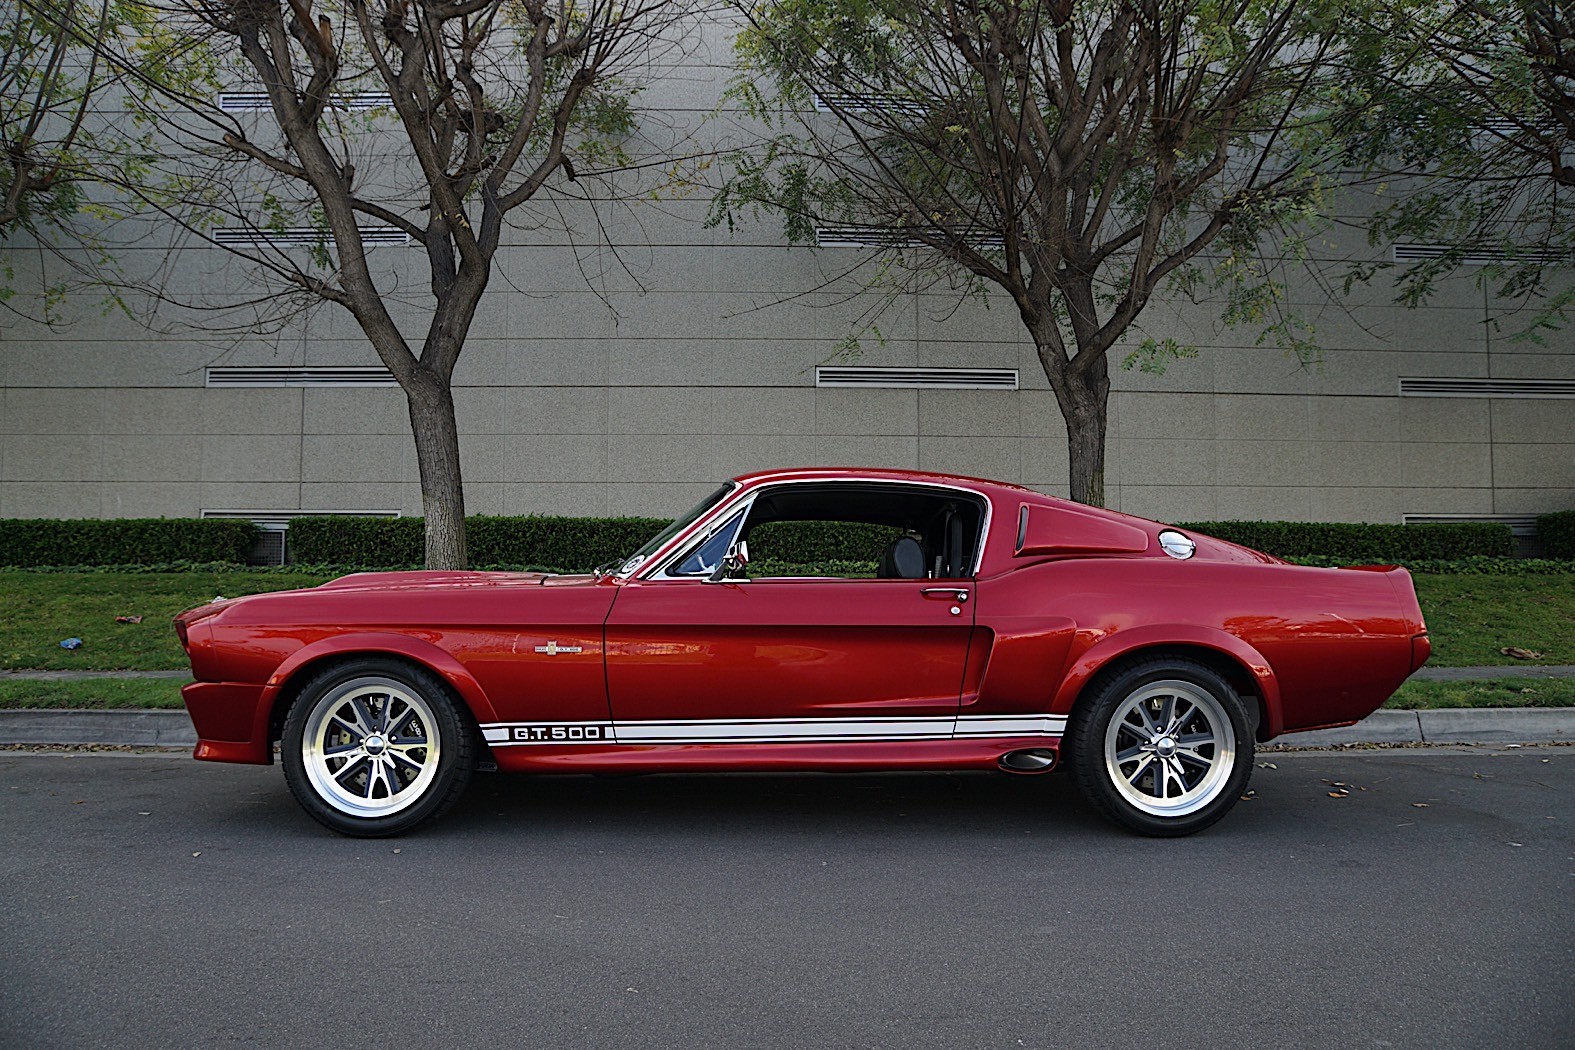 1968 Ford Mustang Eleanor Tribute Is About as Cool as the ...